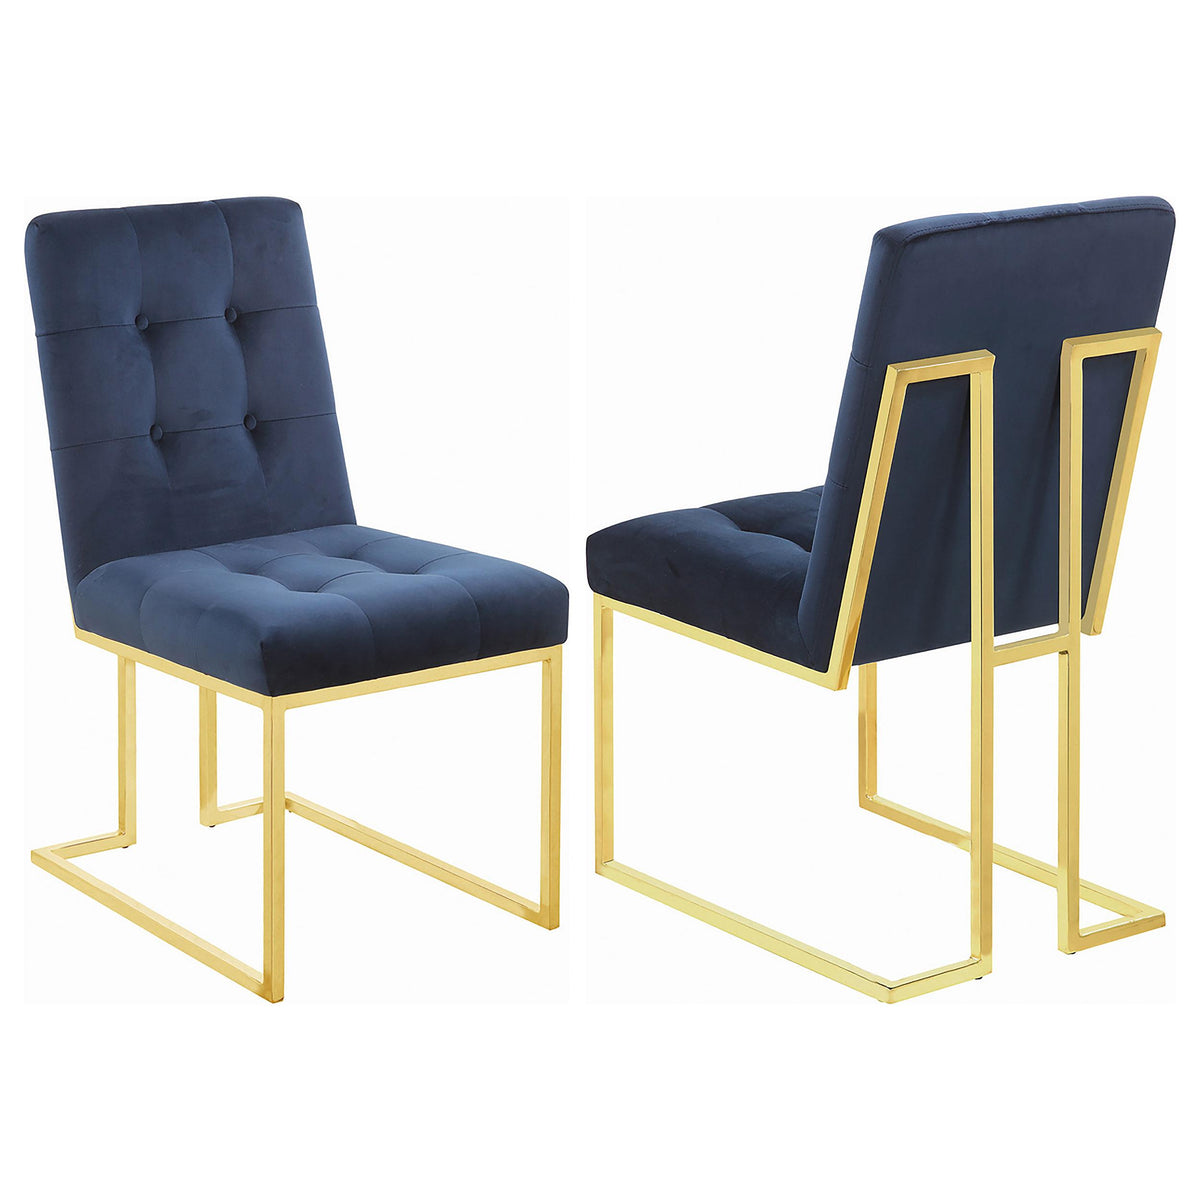 Cisco Tufted Back Side Chairs Ink Blue (Set of 2) Cisco Tufted Back Side Chairs Ink Blue (Set of 2) Half Price Furniture